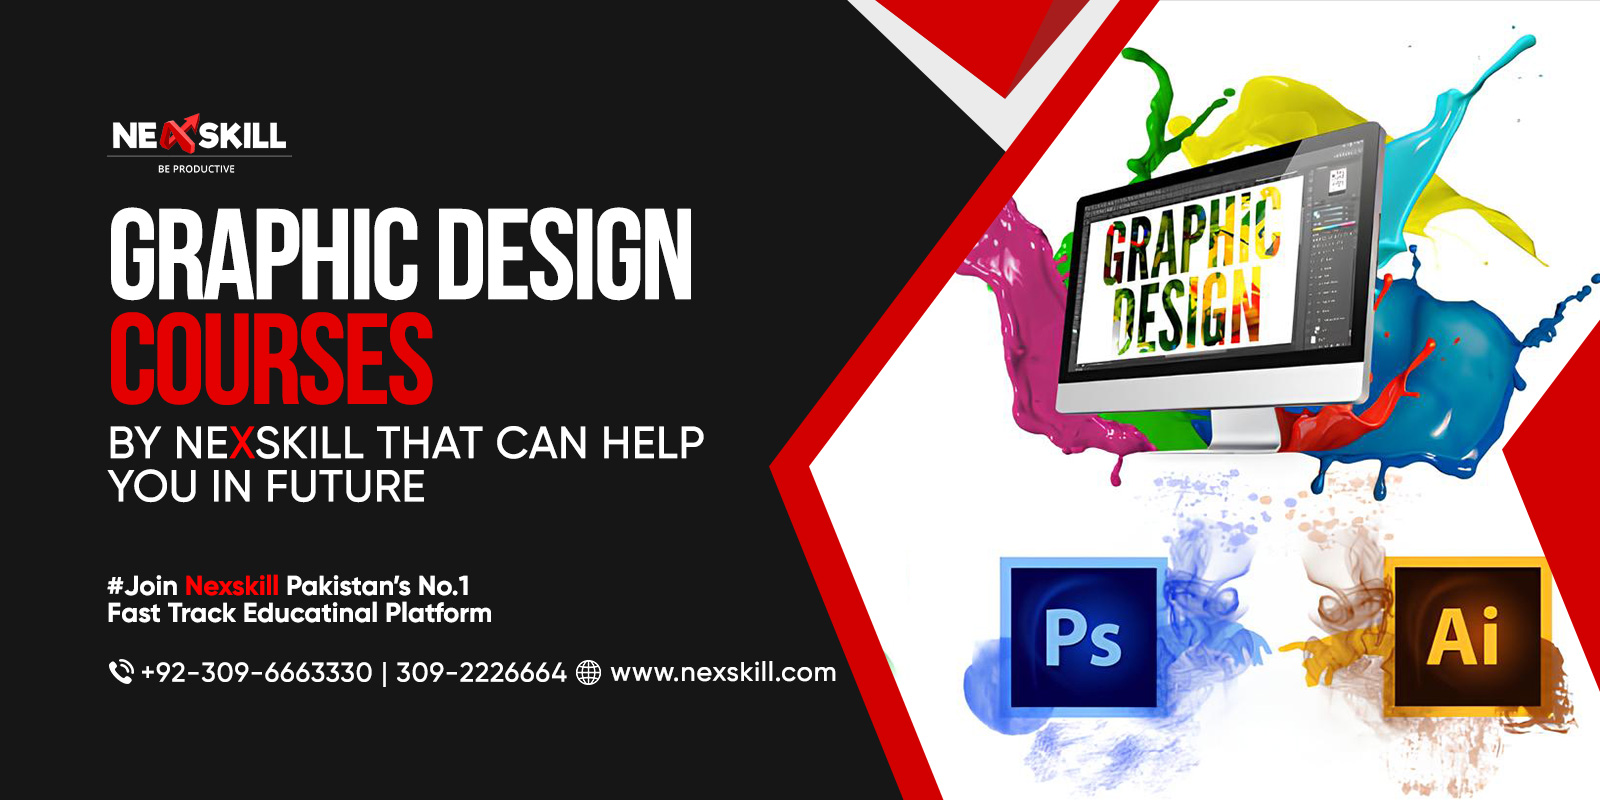 Graphic Design courses by Nexskill that can help you in Future